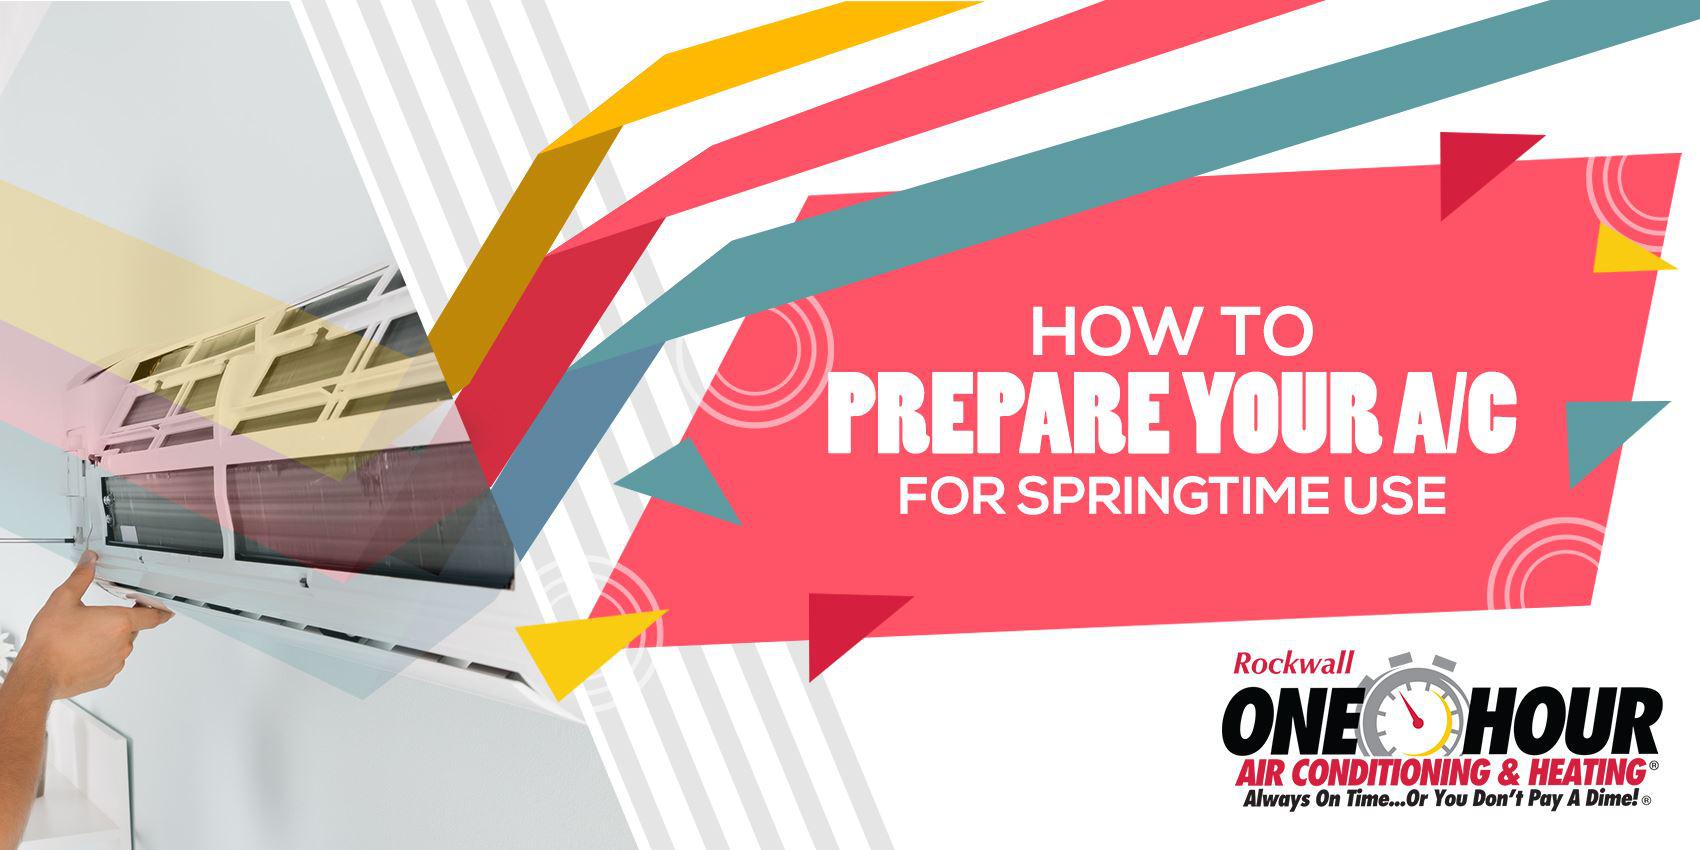 How to Prepare Your A/C for Springtime Use